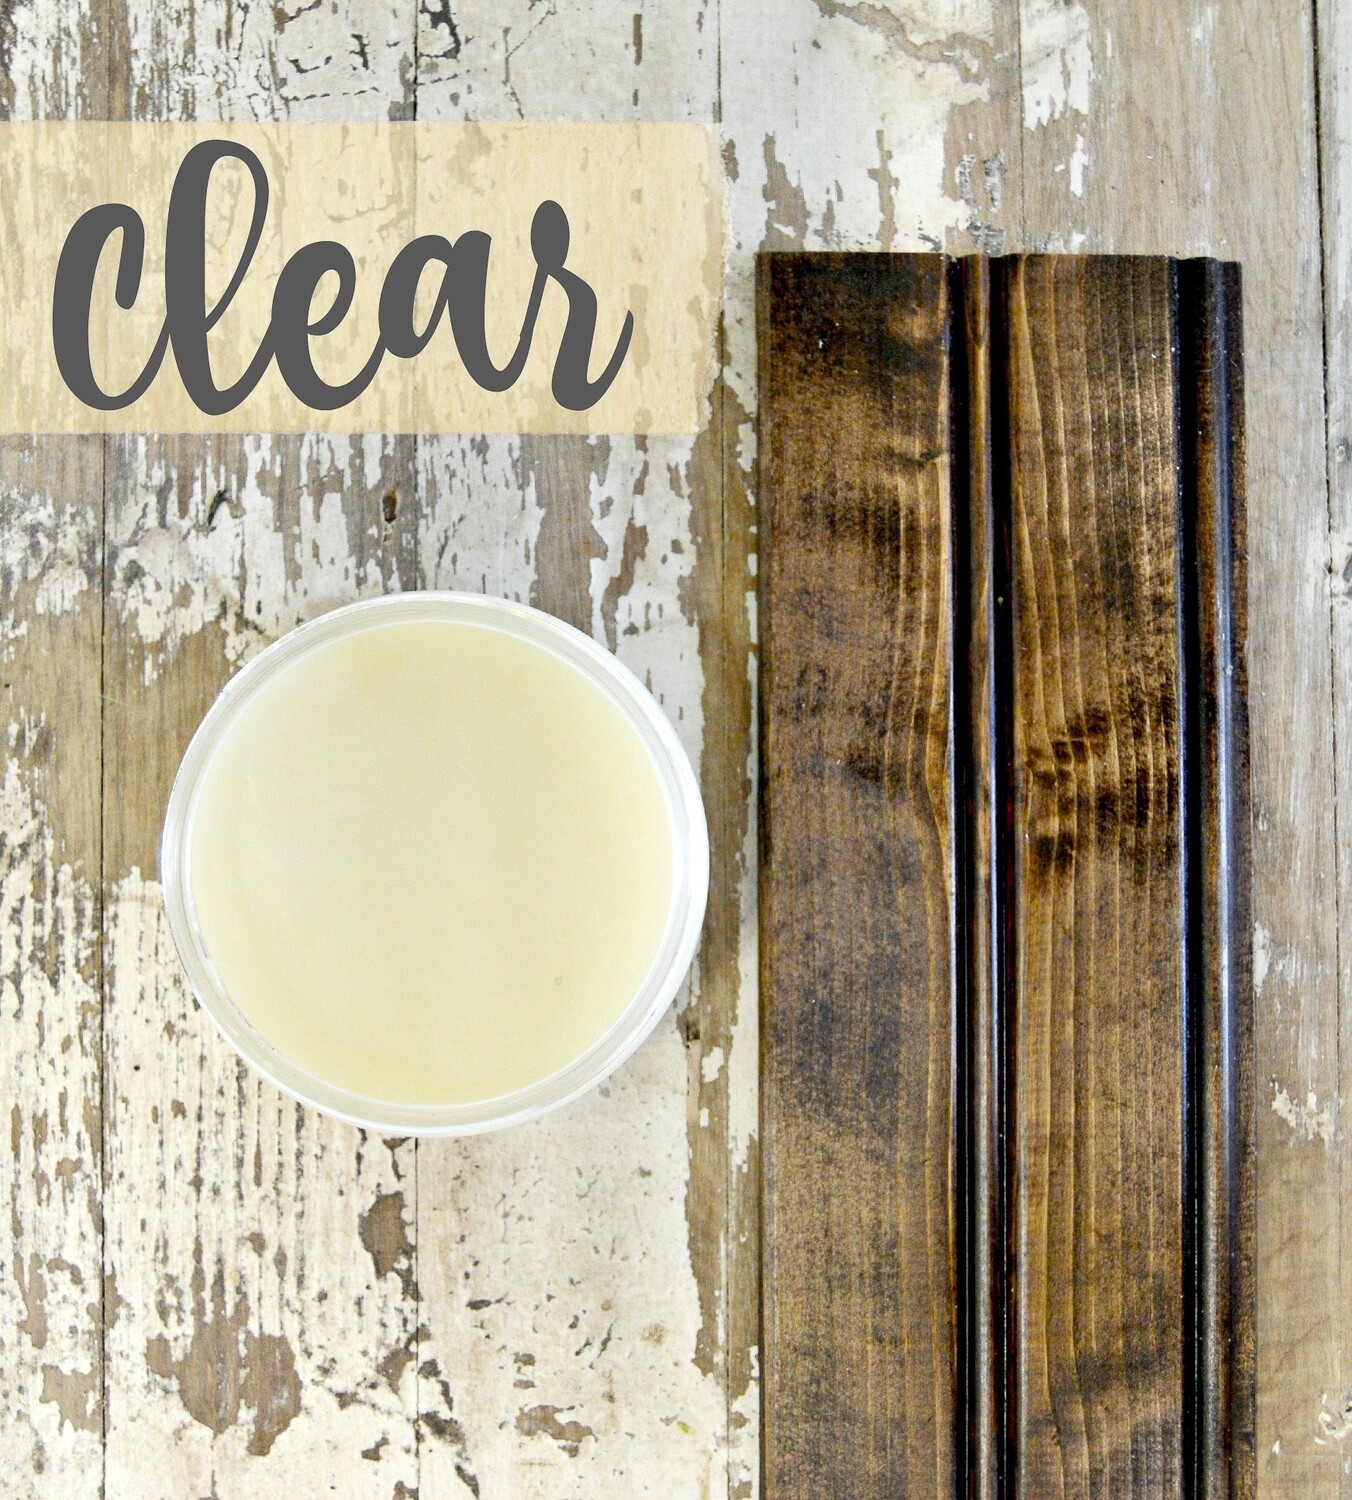 Clear Beeswax Furniture Wax by Sweet Pickins